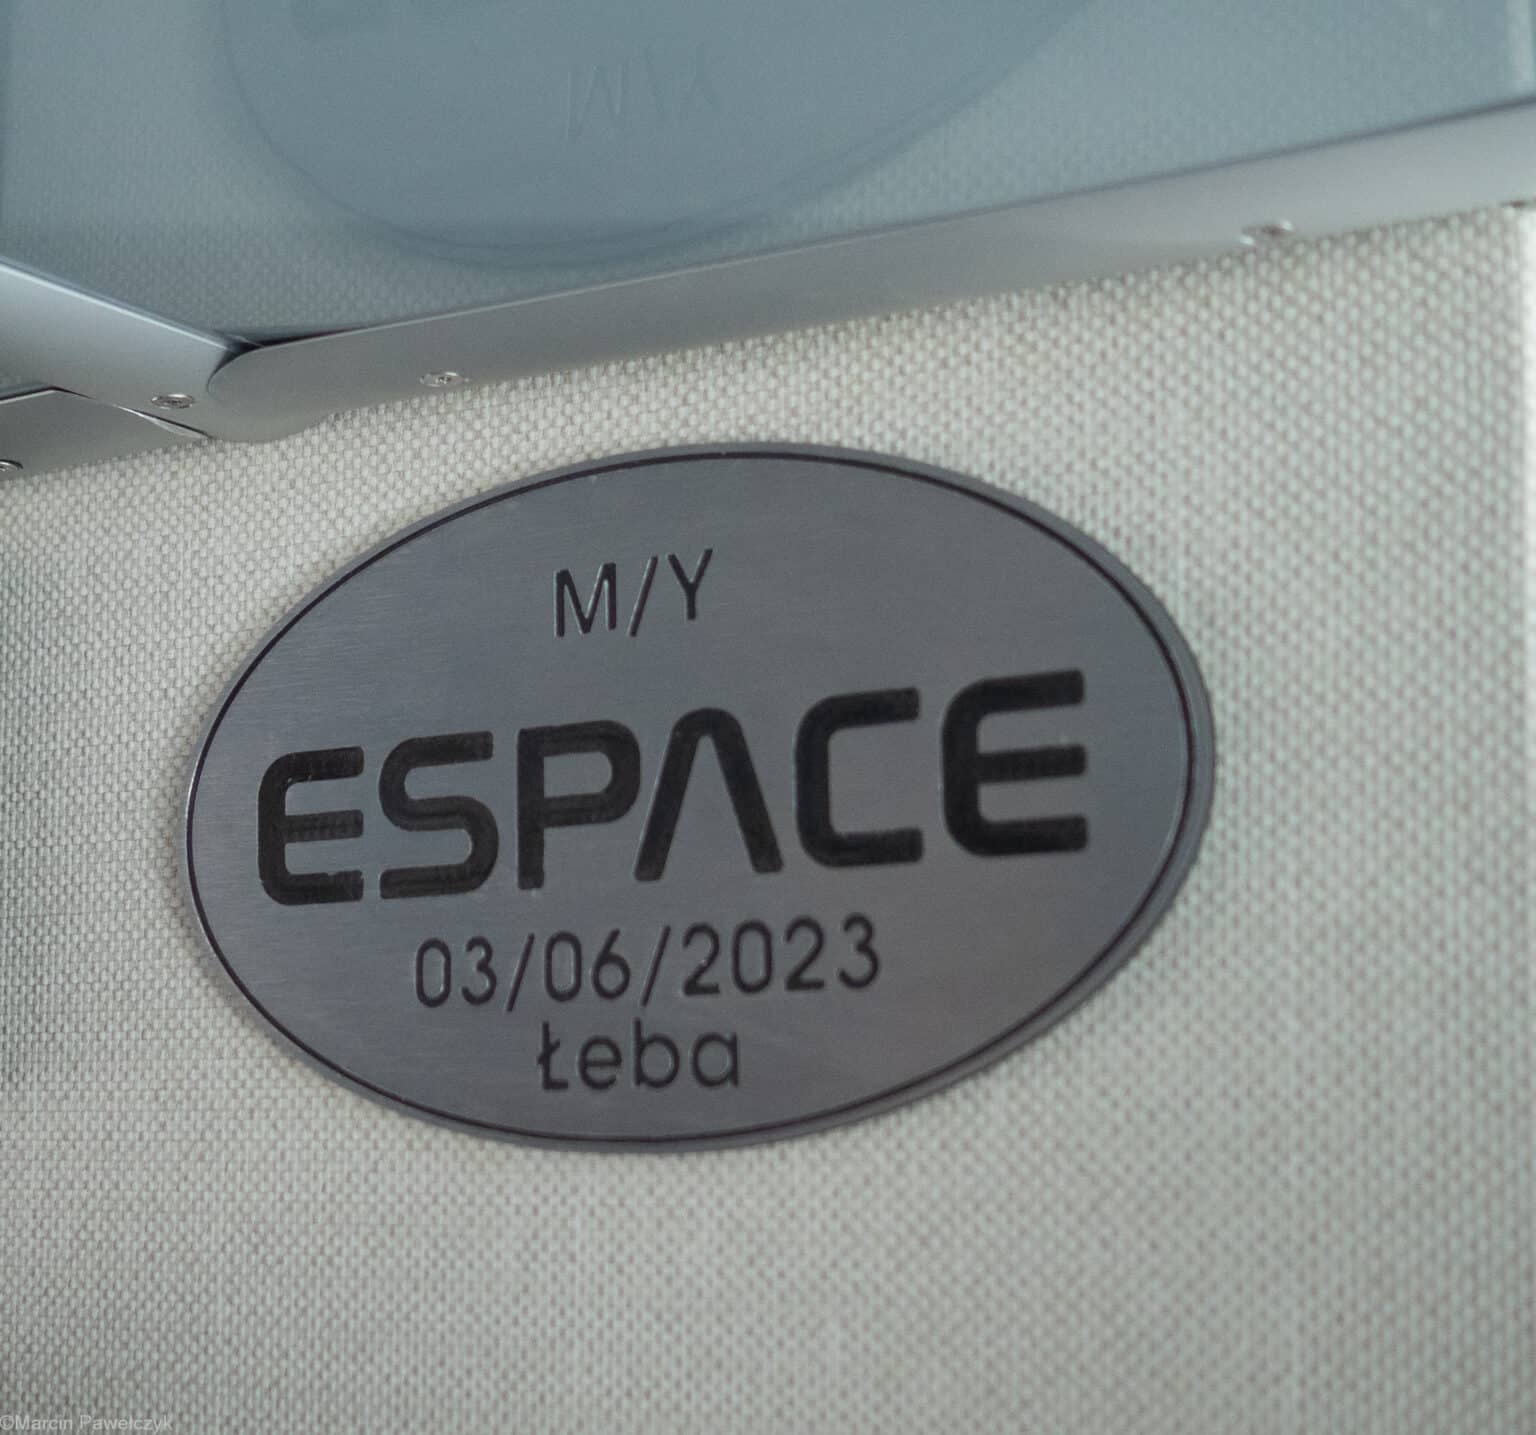 Espace new expedition vessel